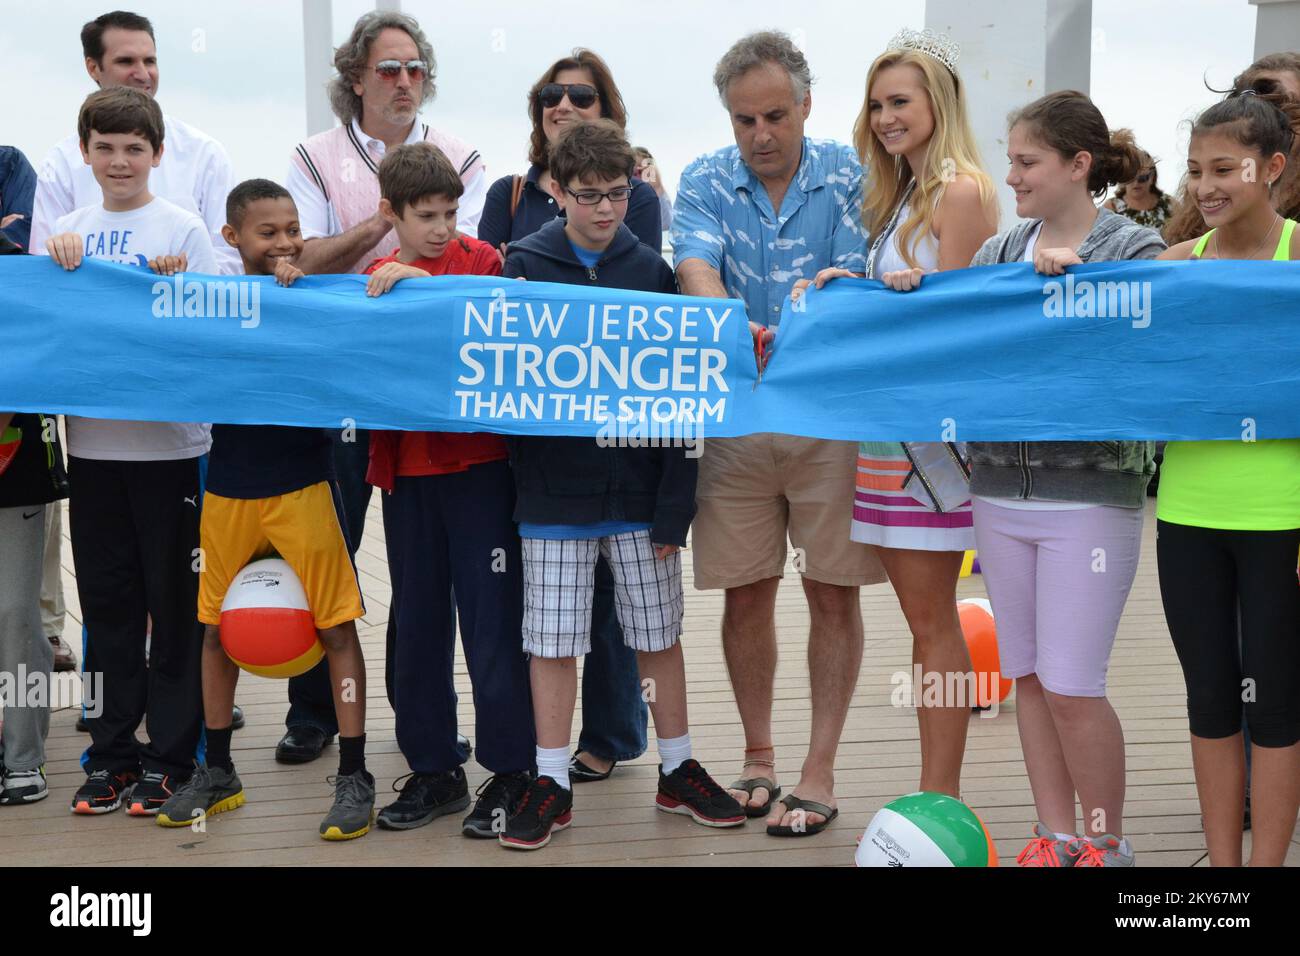 Mayor Cuts Ribbon to Officially Open Long Branch Beach. New Jersey Hurricane Sandy. Photographs Relating to Disasters and Emergency Management Programs, Activities, and Officials Stock Photo